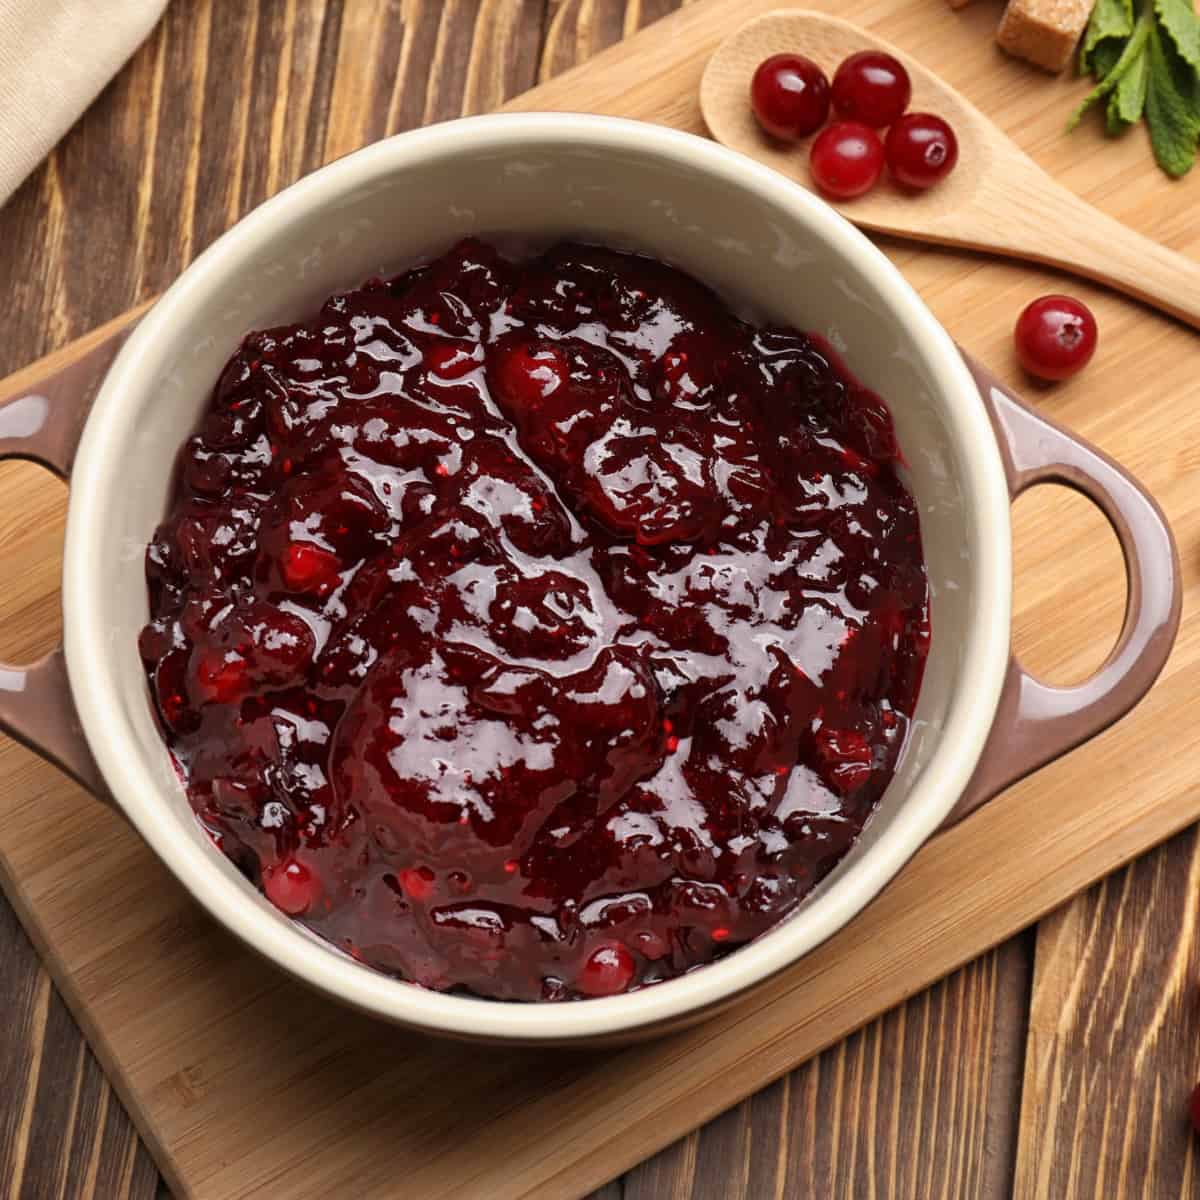 cranberry sauce on wooden cutting board